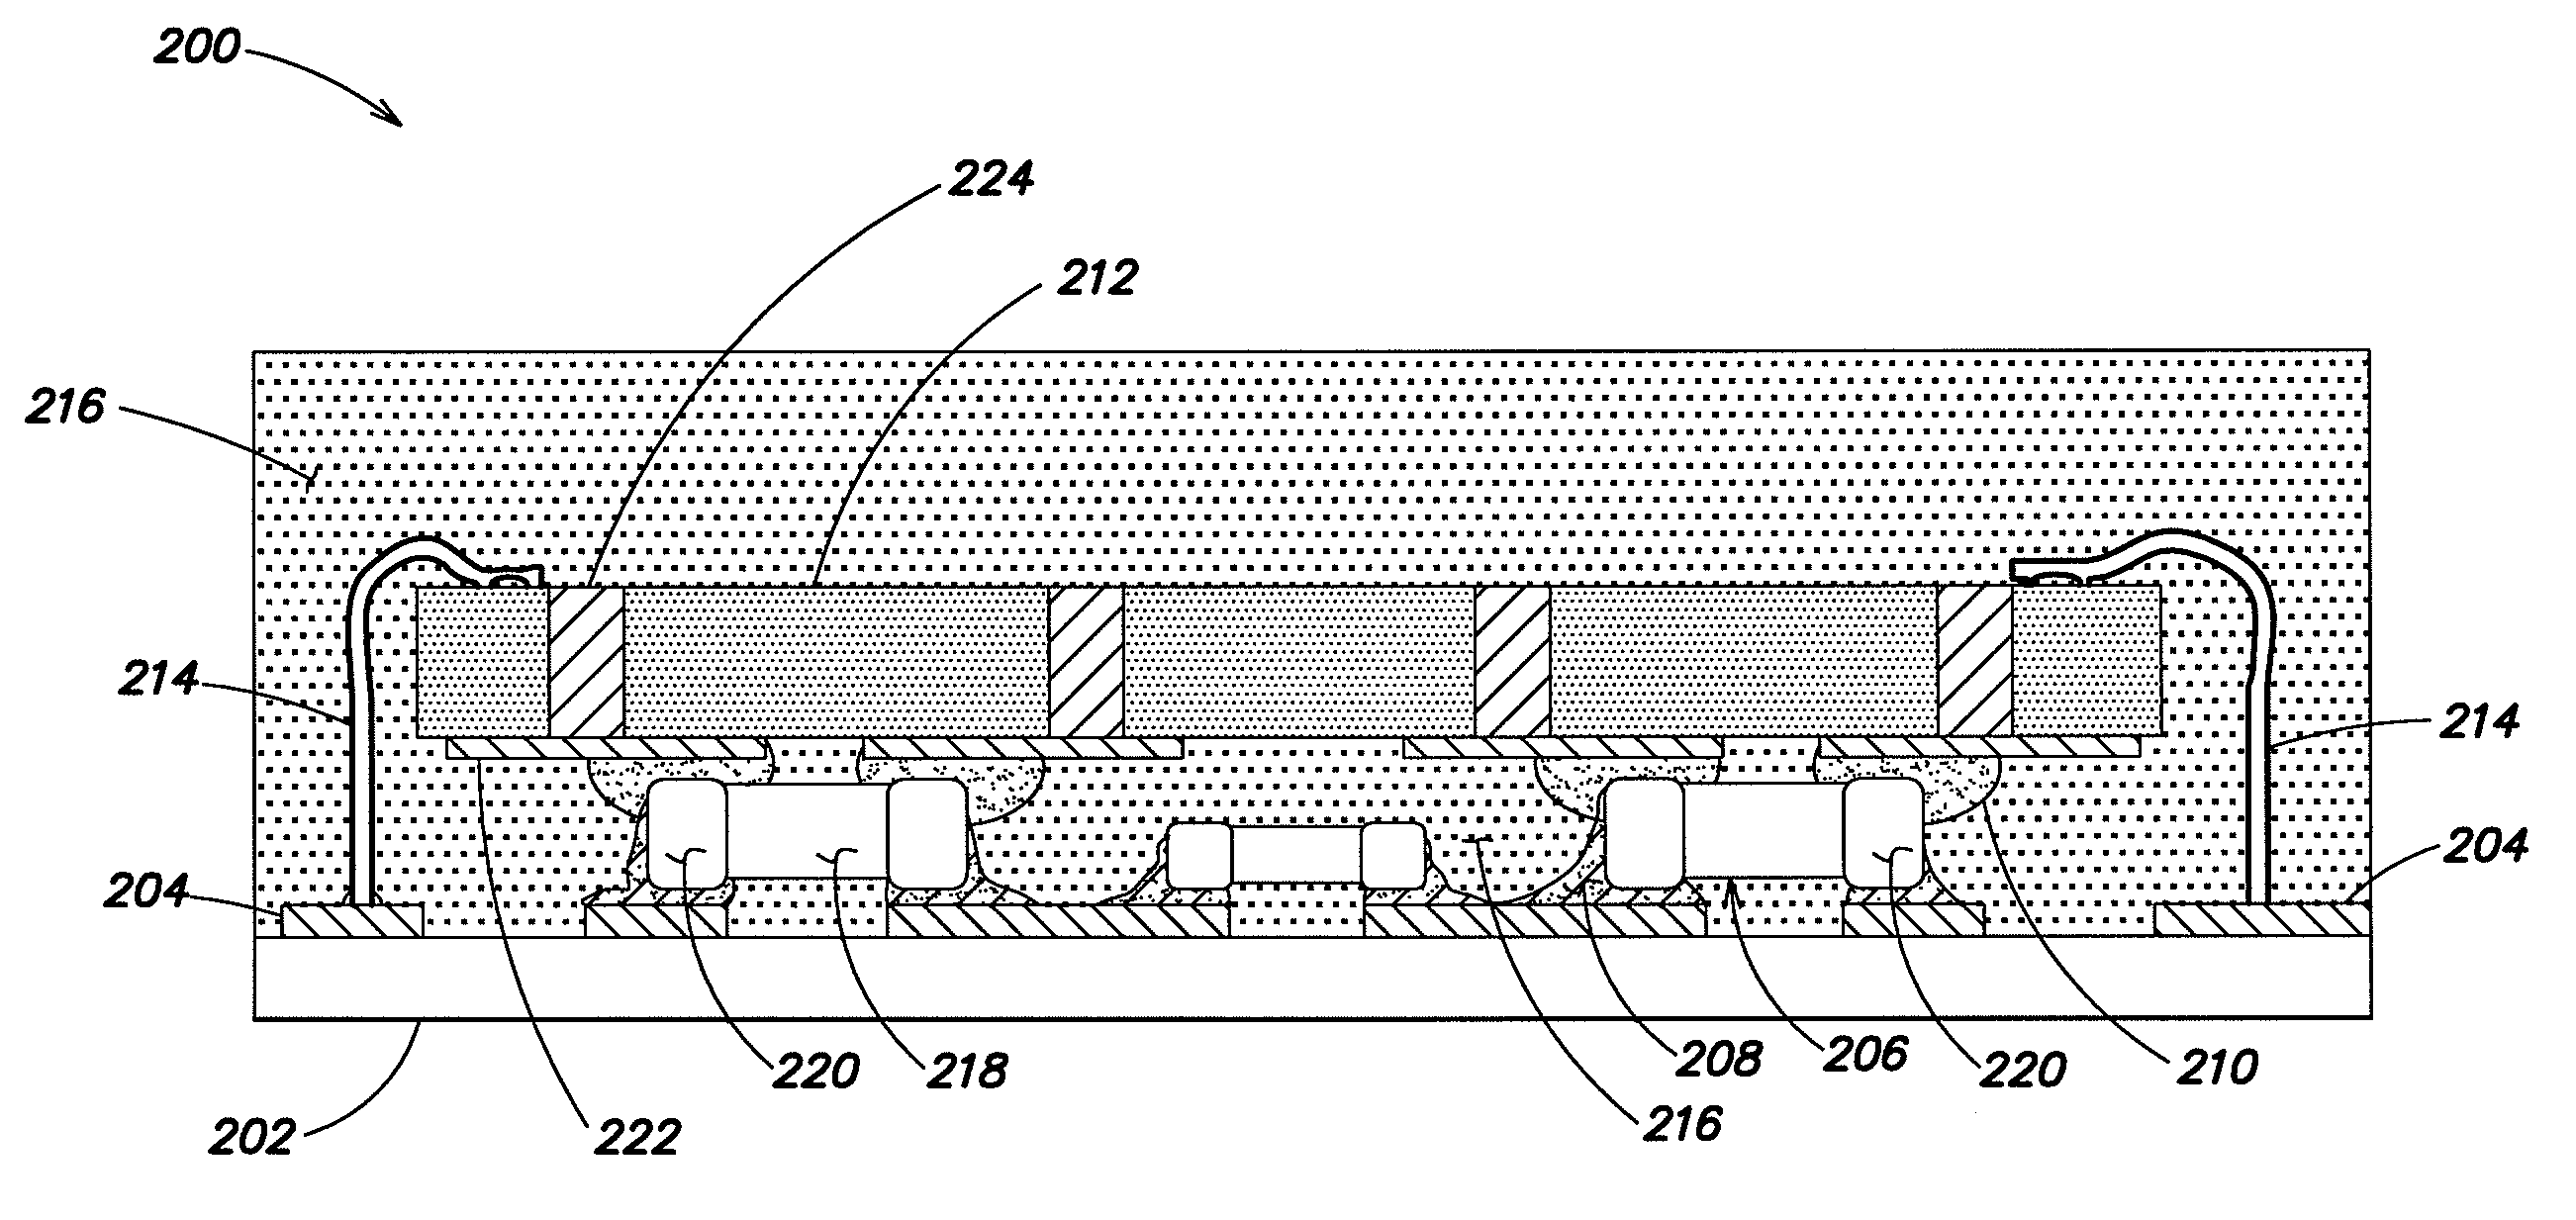 3-d stacking of active devices over passive devices